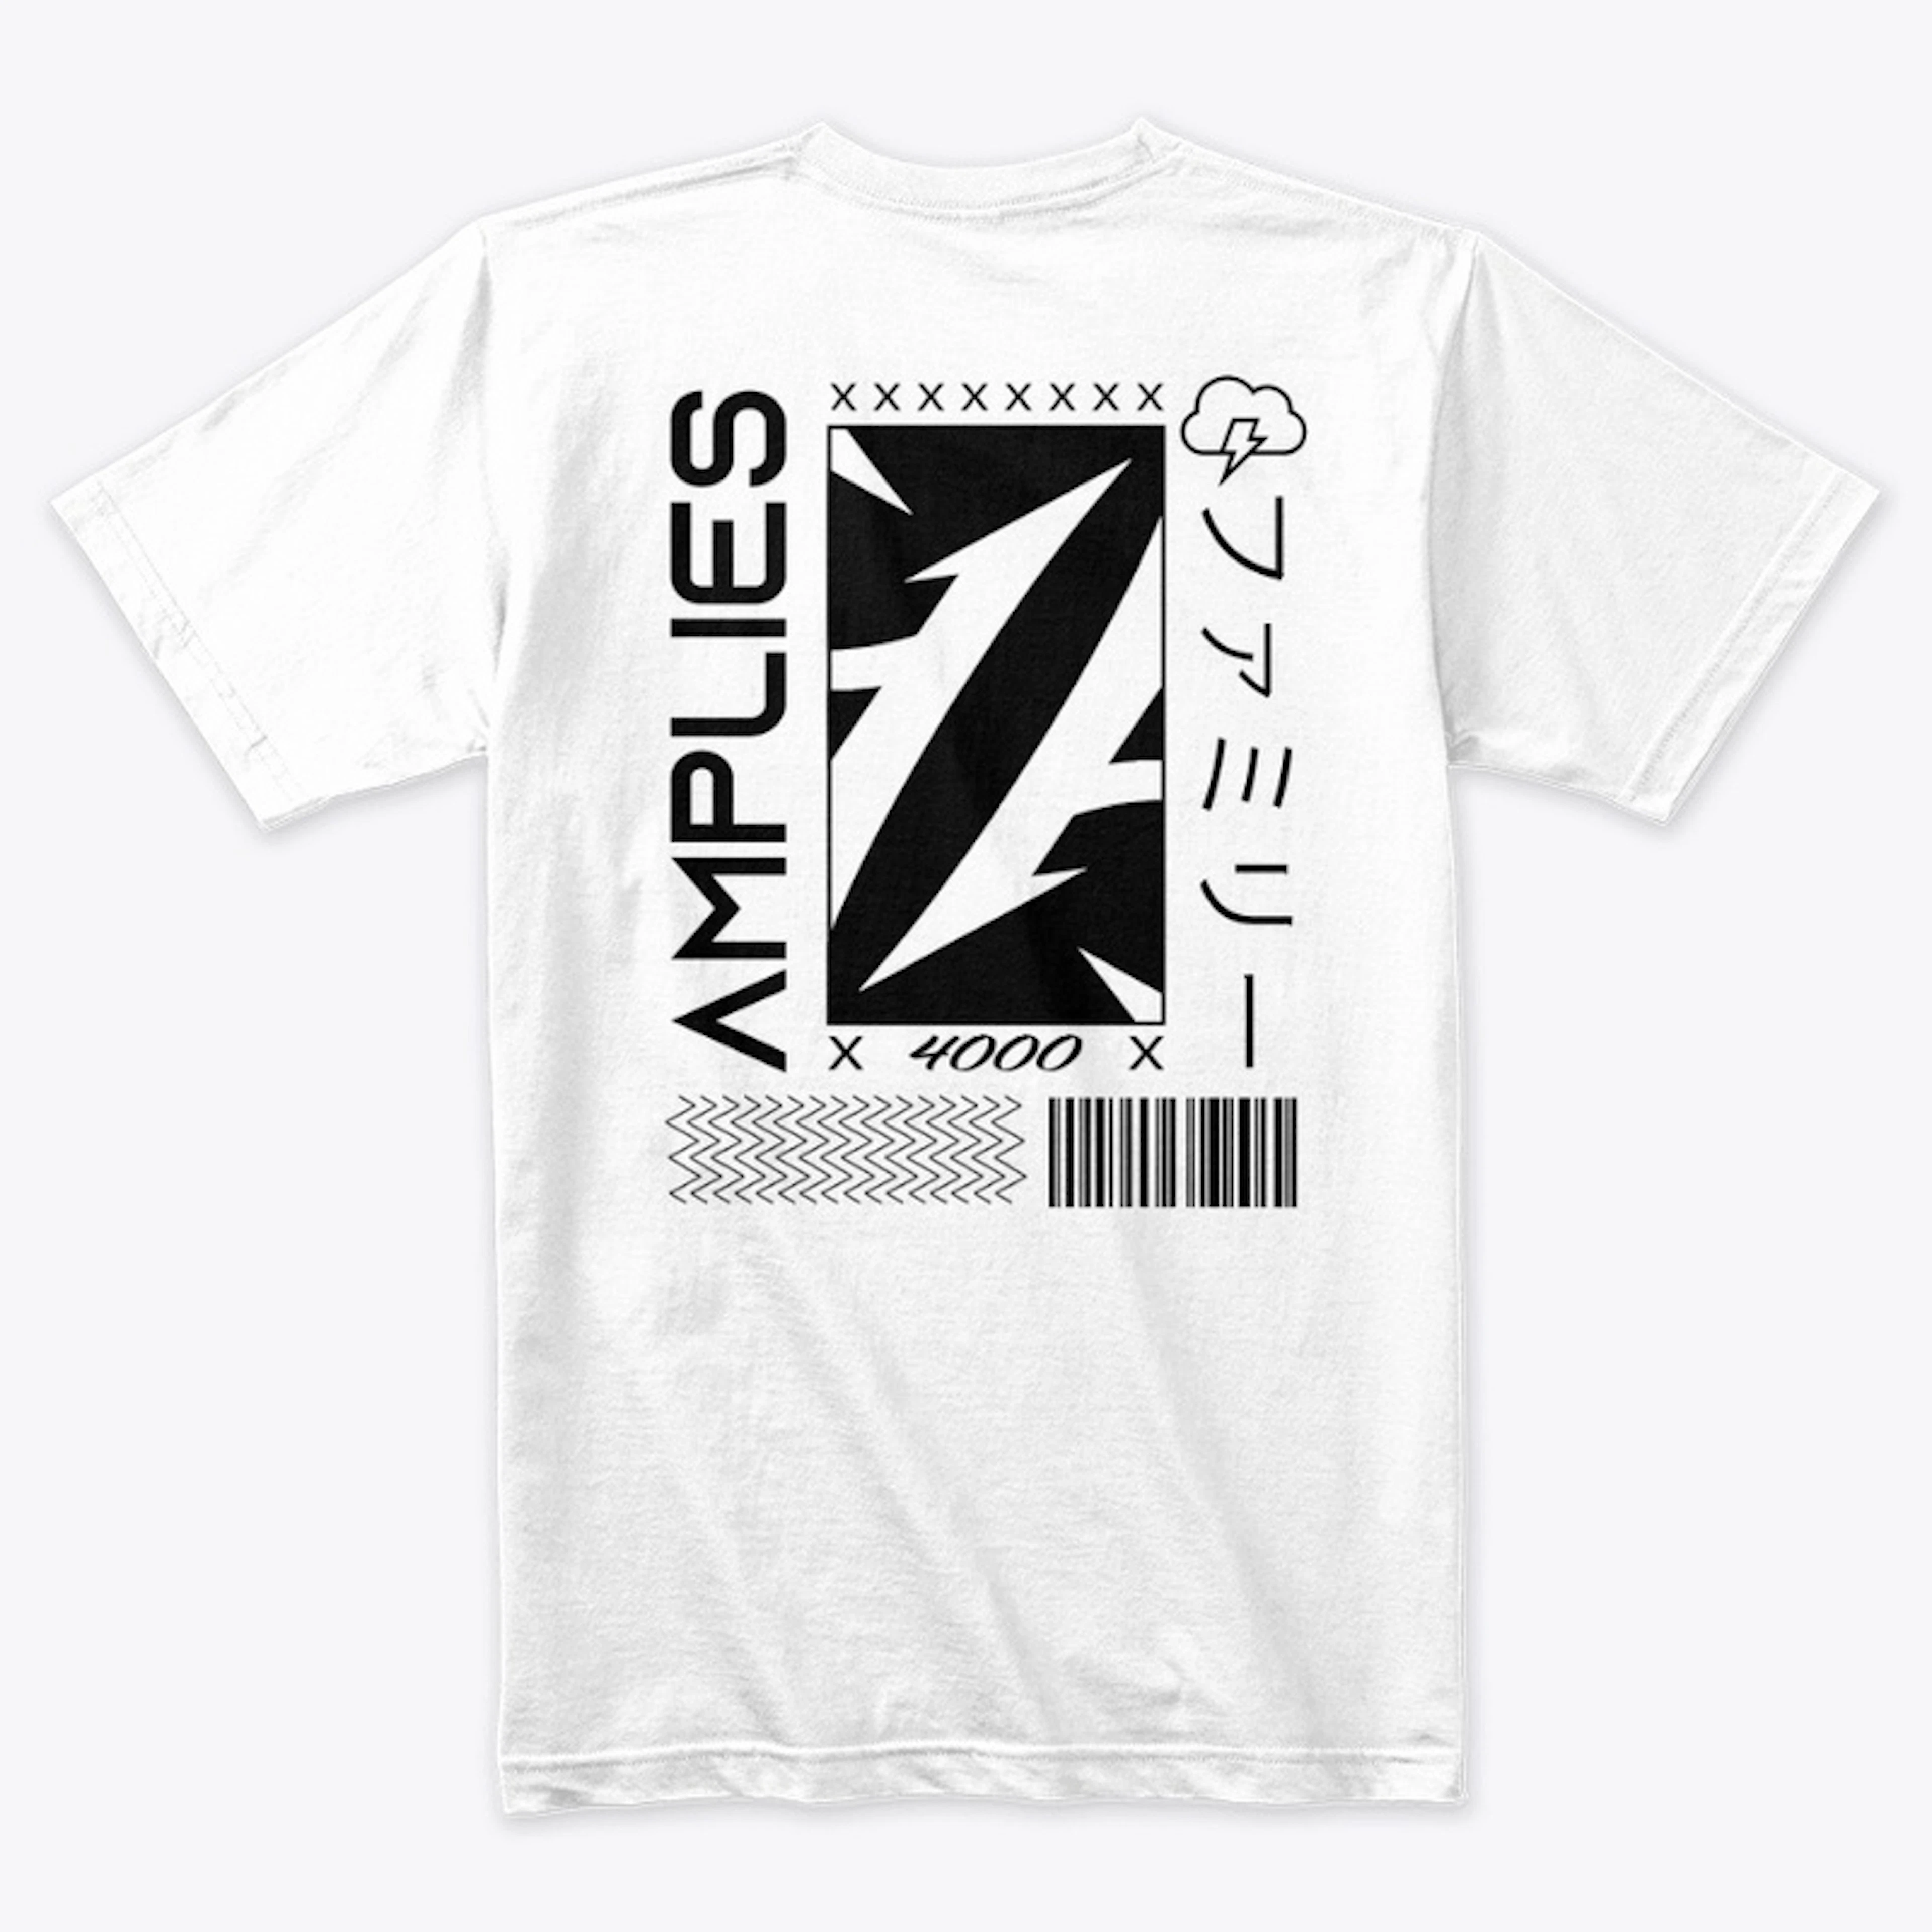 4K (Limited Edition) T-Shirt